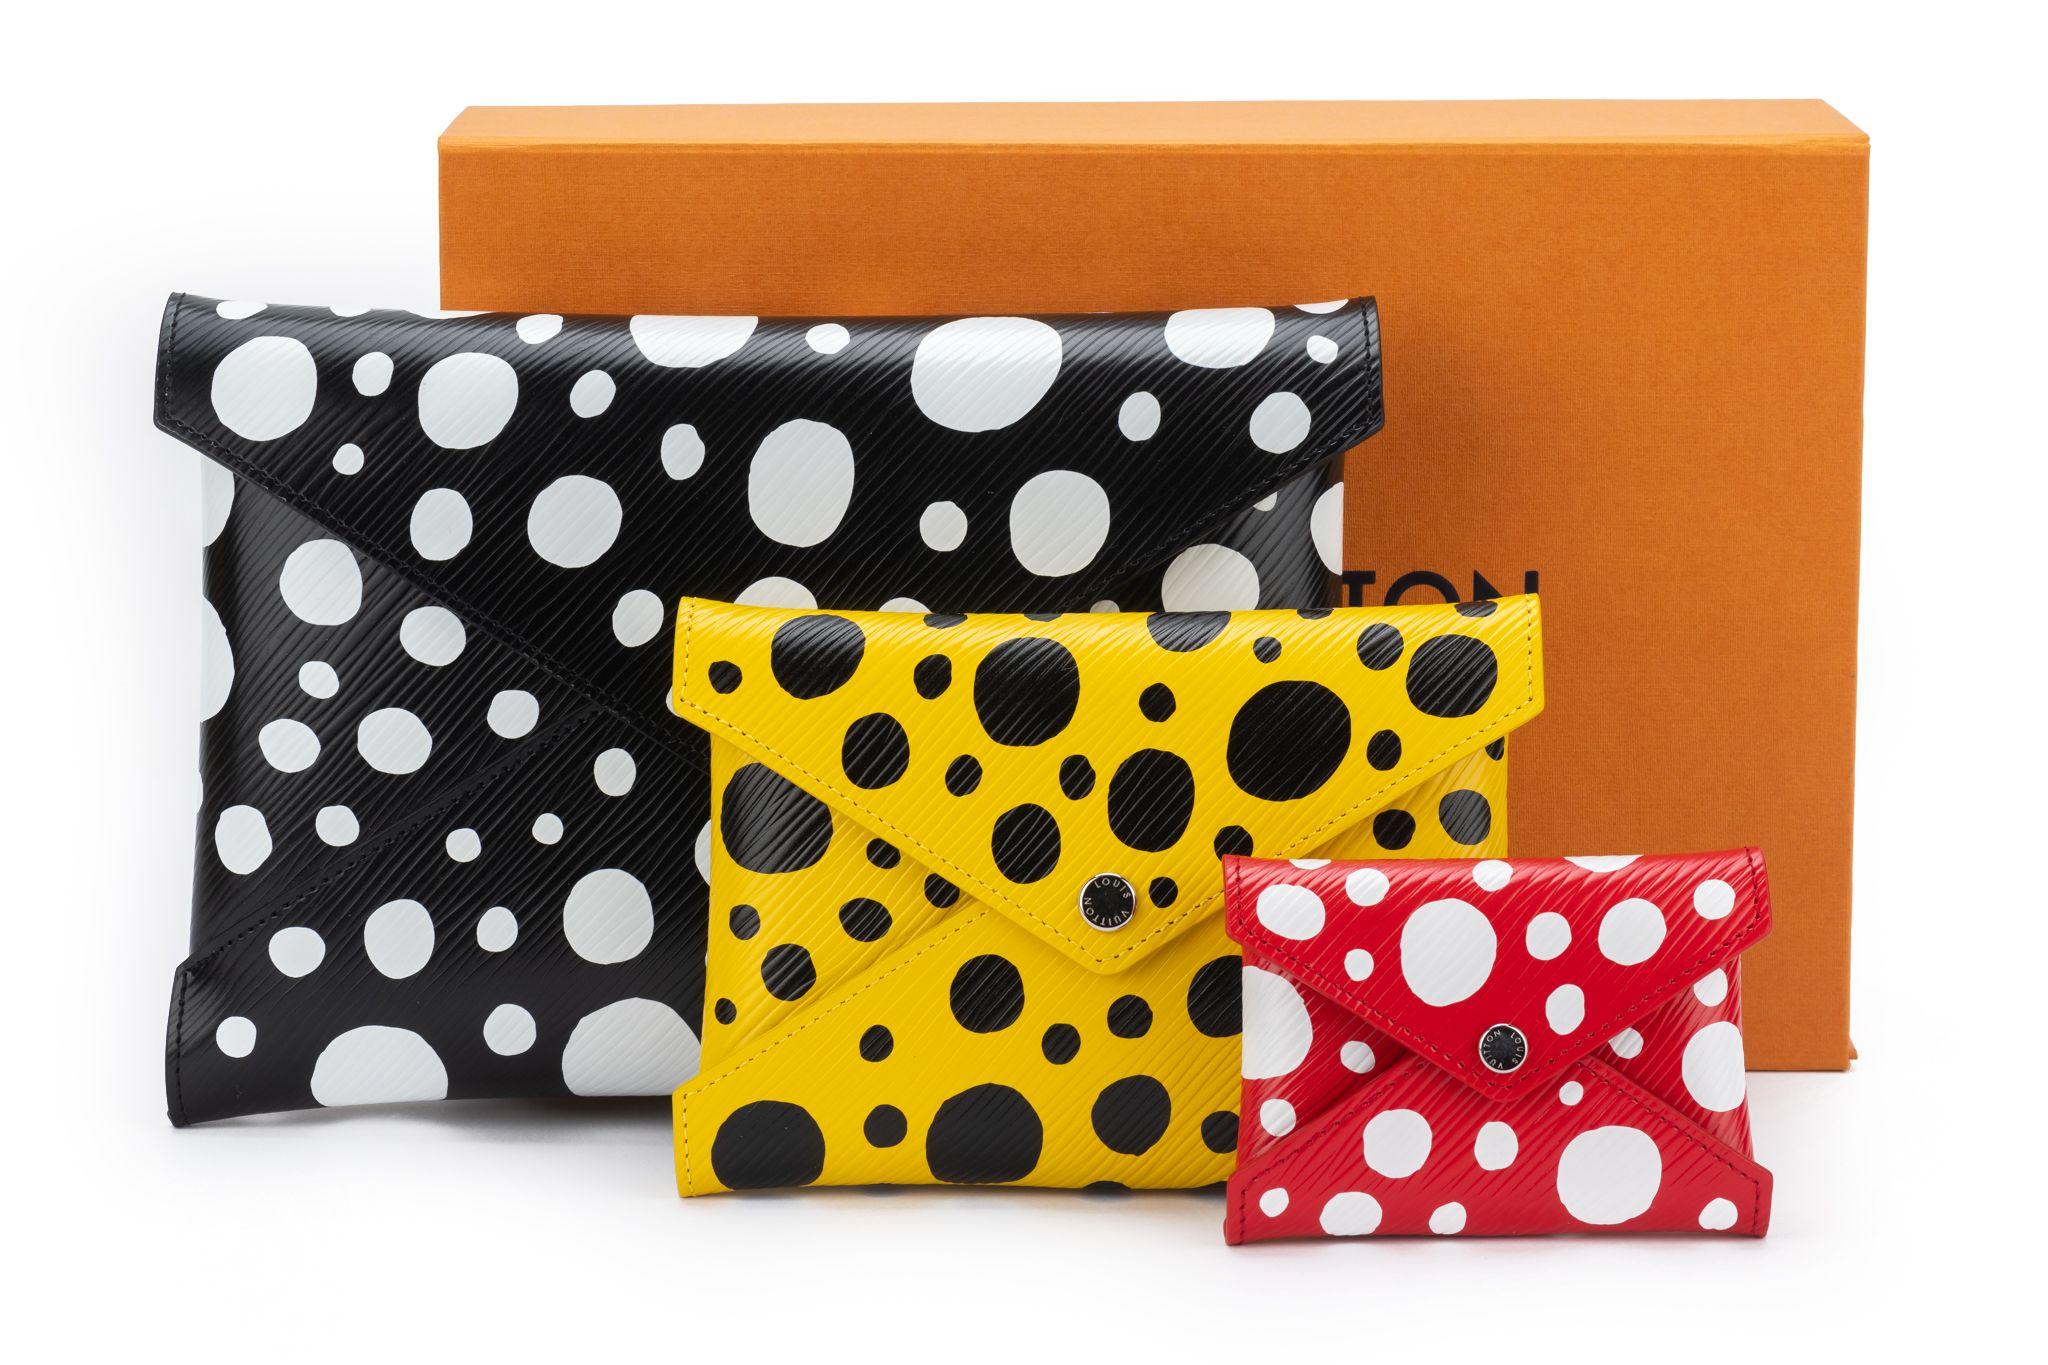 The LVxYK Kirigami pouch joins the Louis Vuitton x Yayoi Kusama collection with the vibrant “Infinity Dots” print on embossed Epi cowhide. Dotted patterns are a signature feature of the acclaimed Japanese artist’s work. Brand new and comes with the